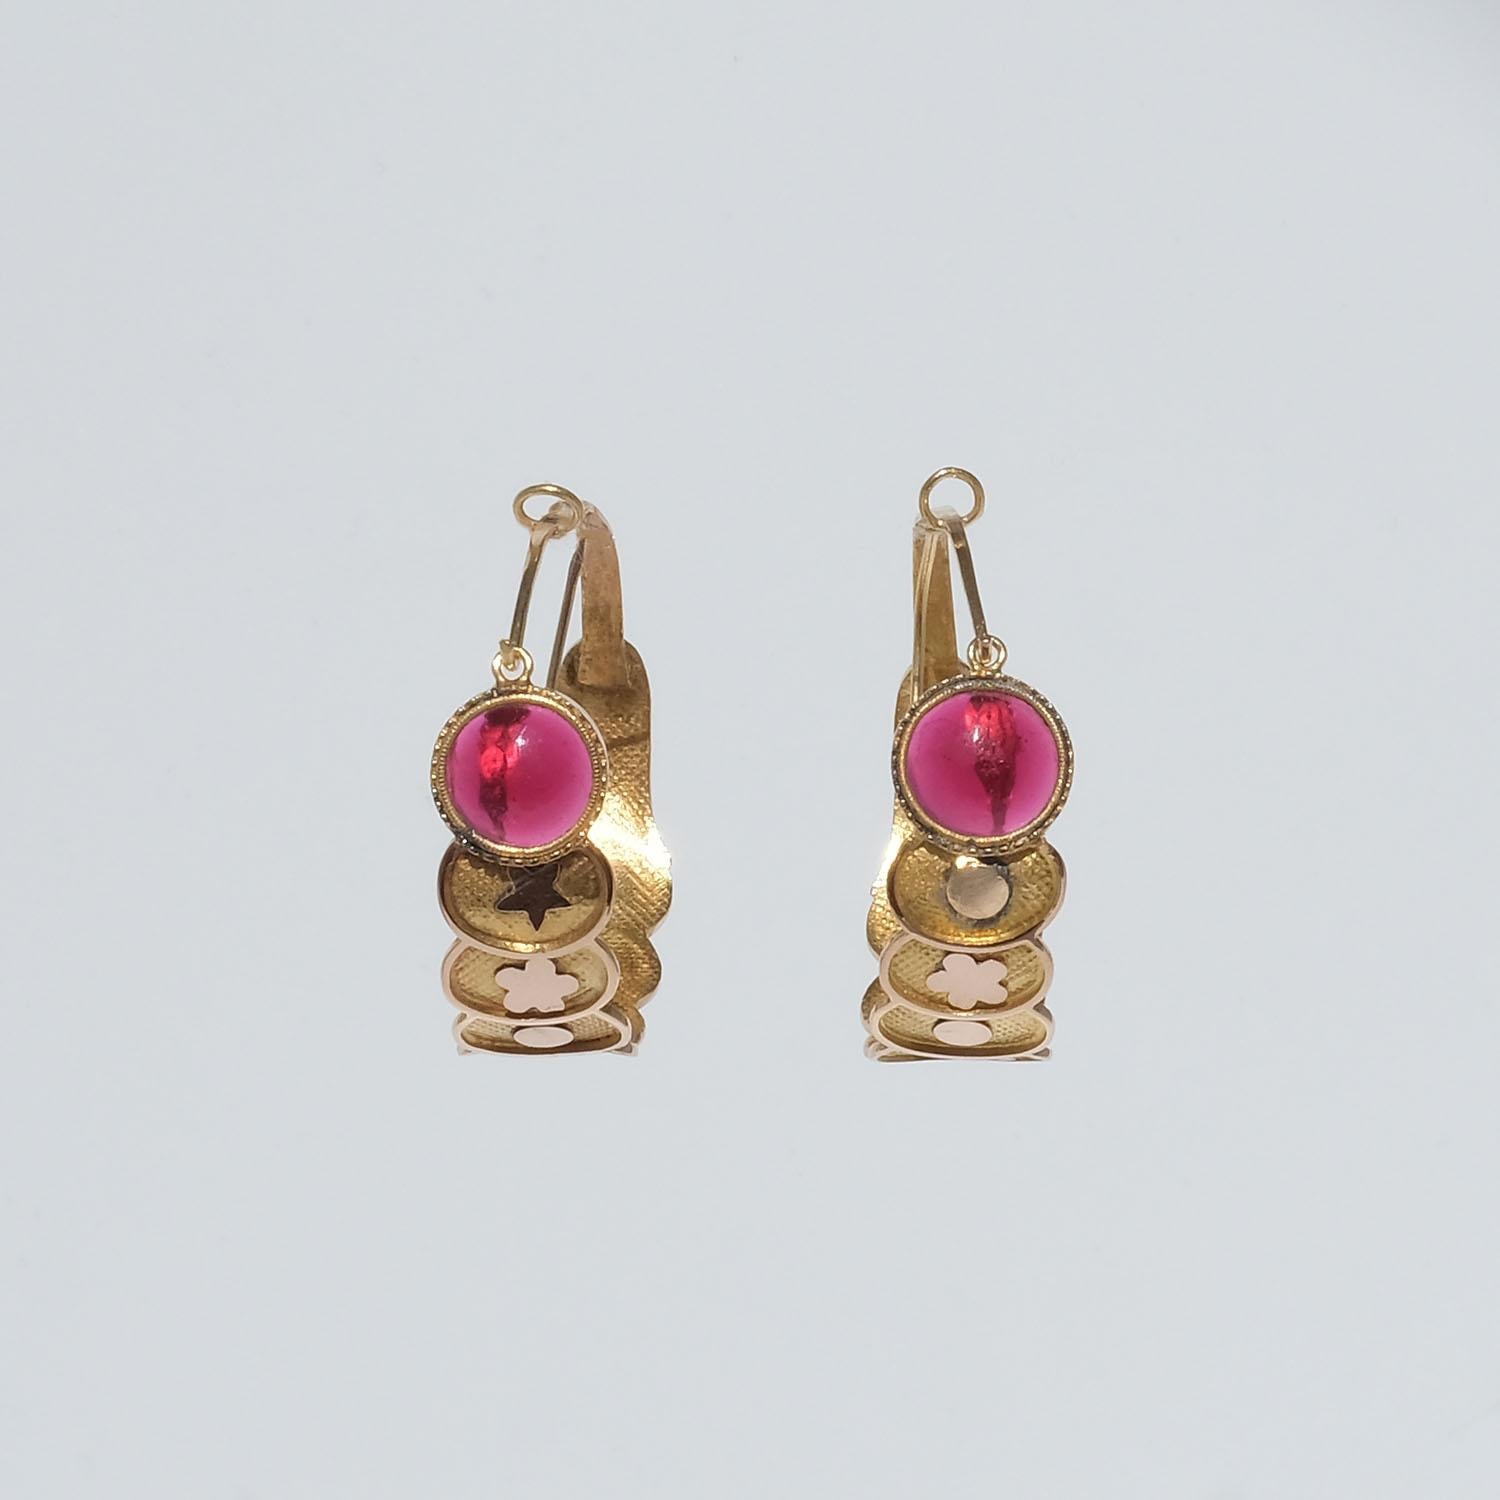 These 18 karat gold creole earrings are shaped with overlaping round discs which are decorated with flowers and circles in rose gold. In front they are decorated with a cabochon cut red glass stone. The earrings open and close with a hinged